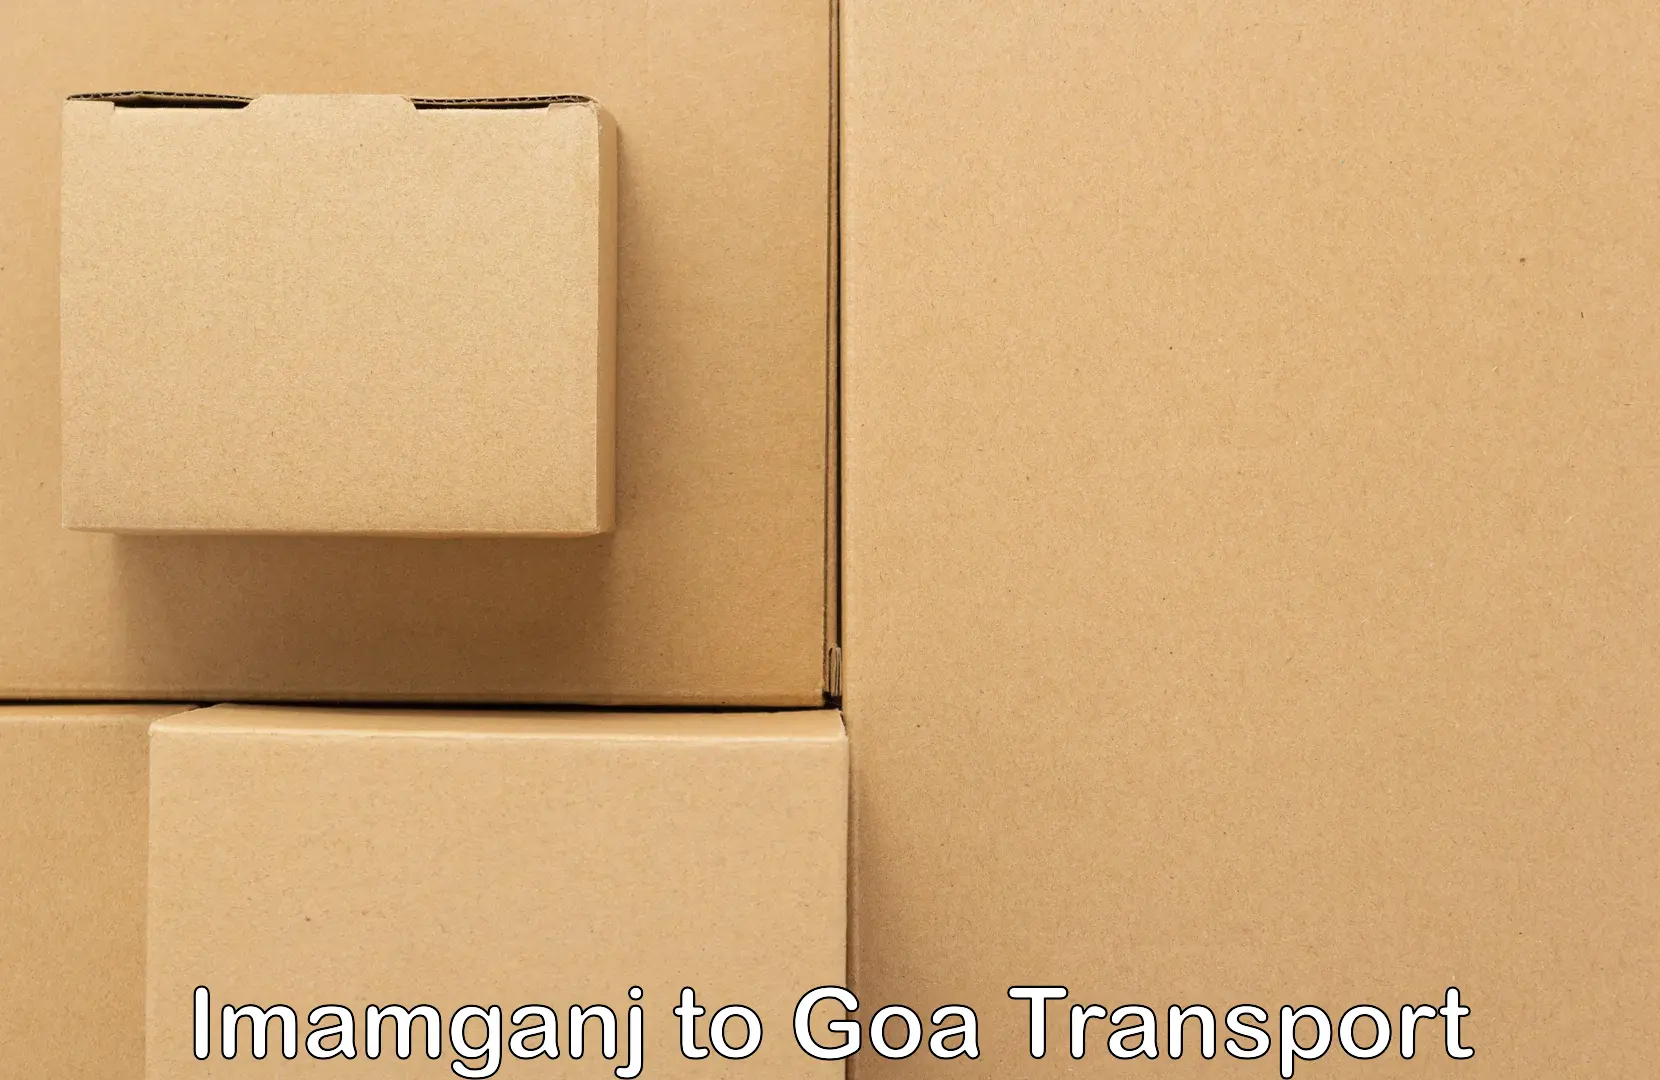 Express transport services in Imamganj to Goa